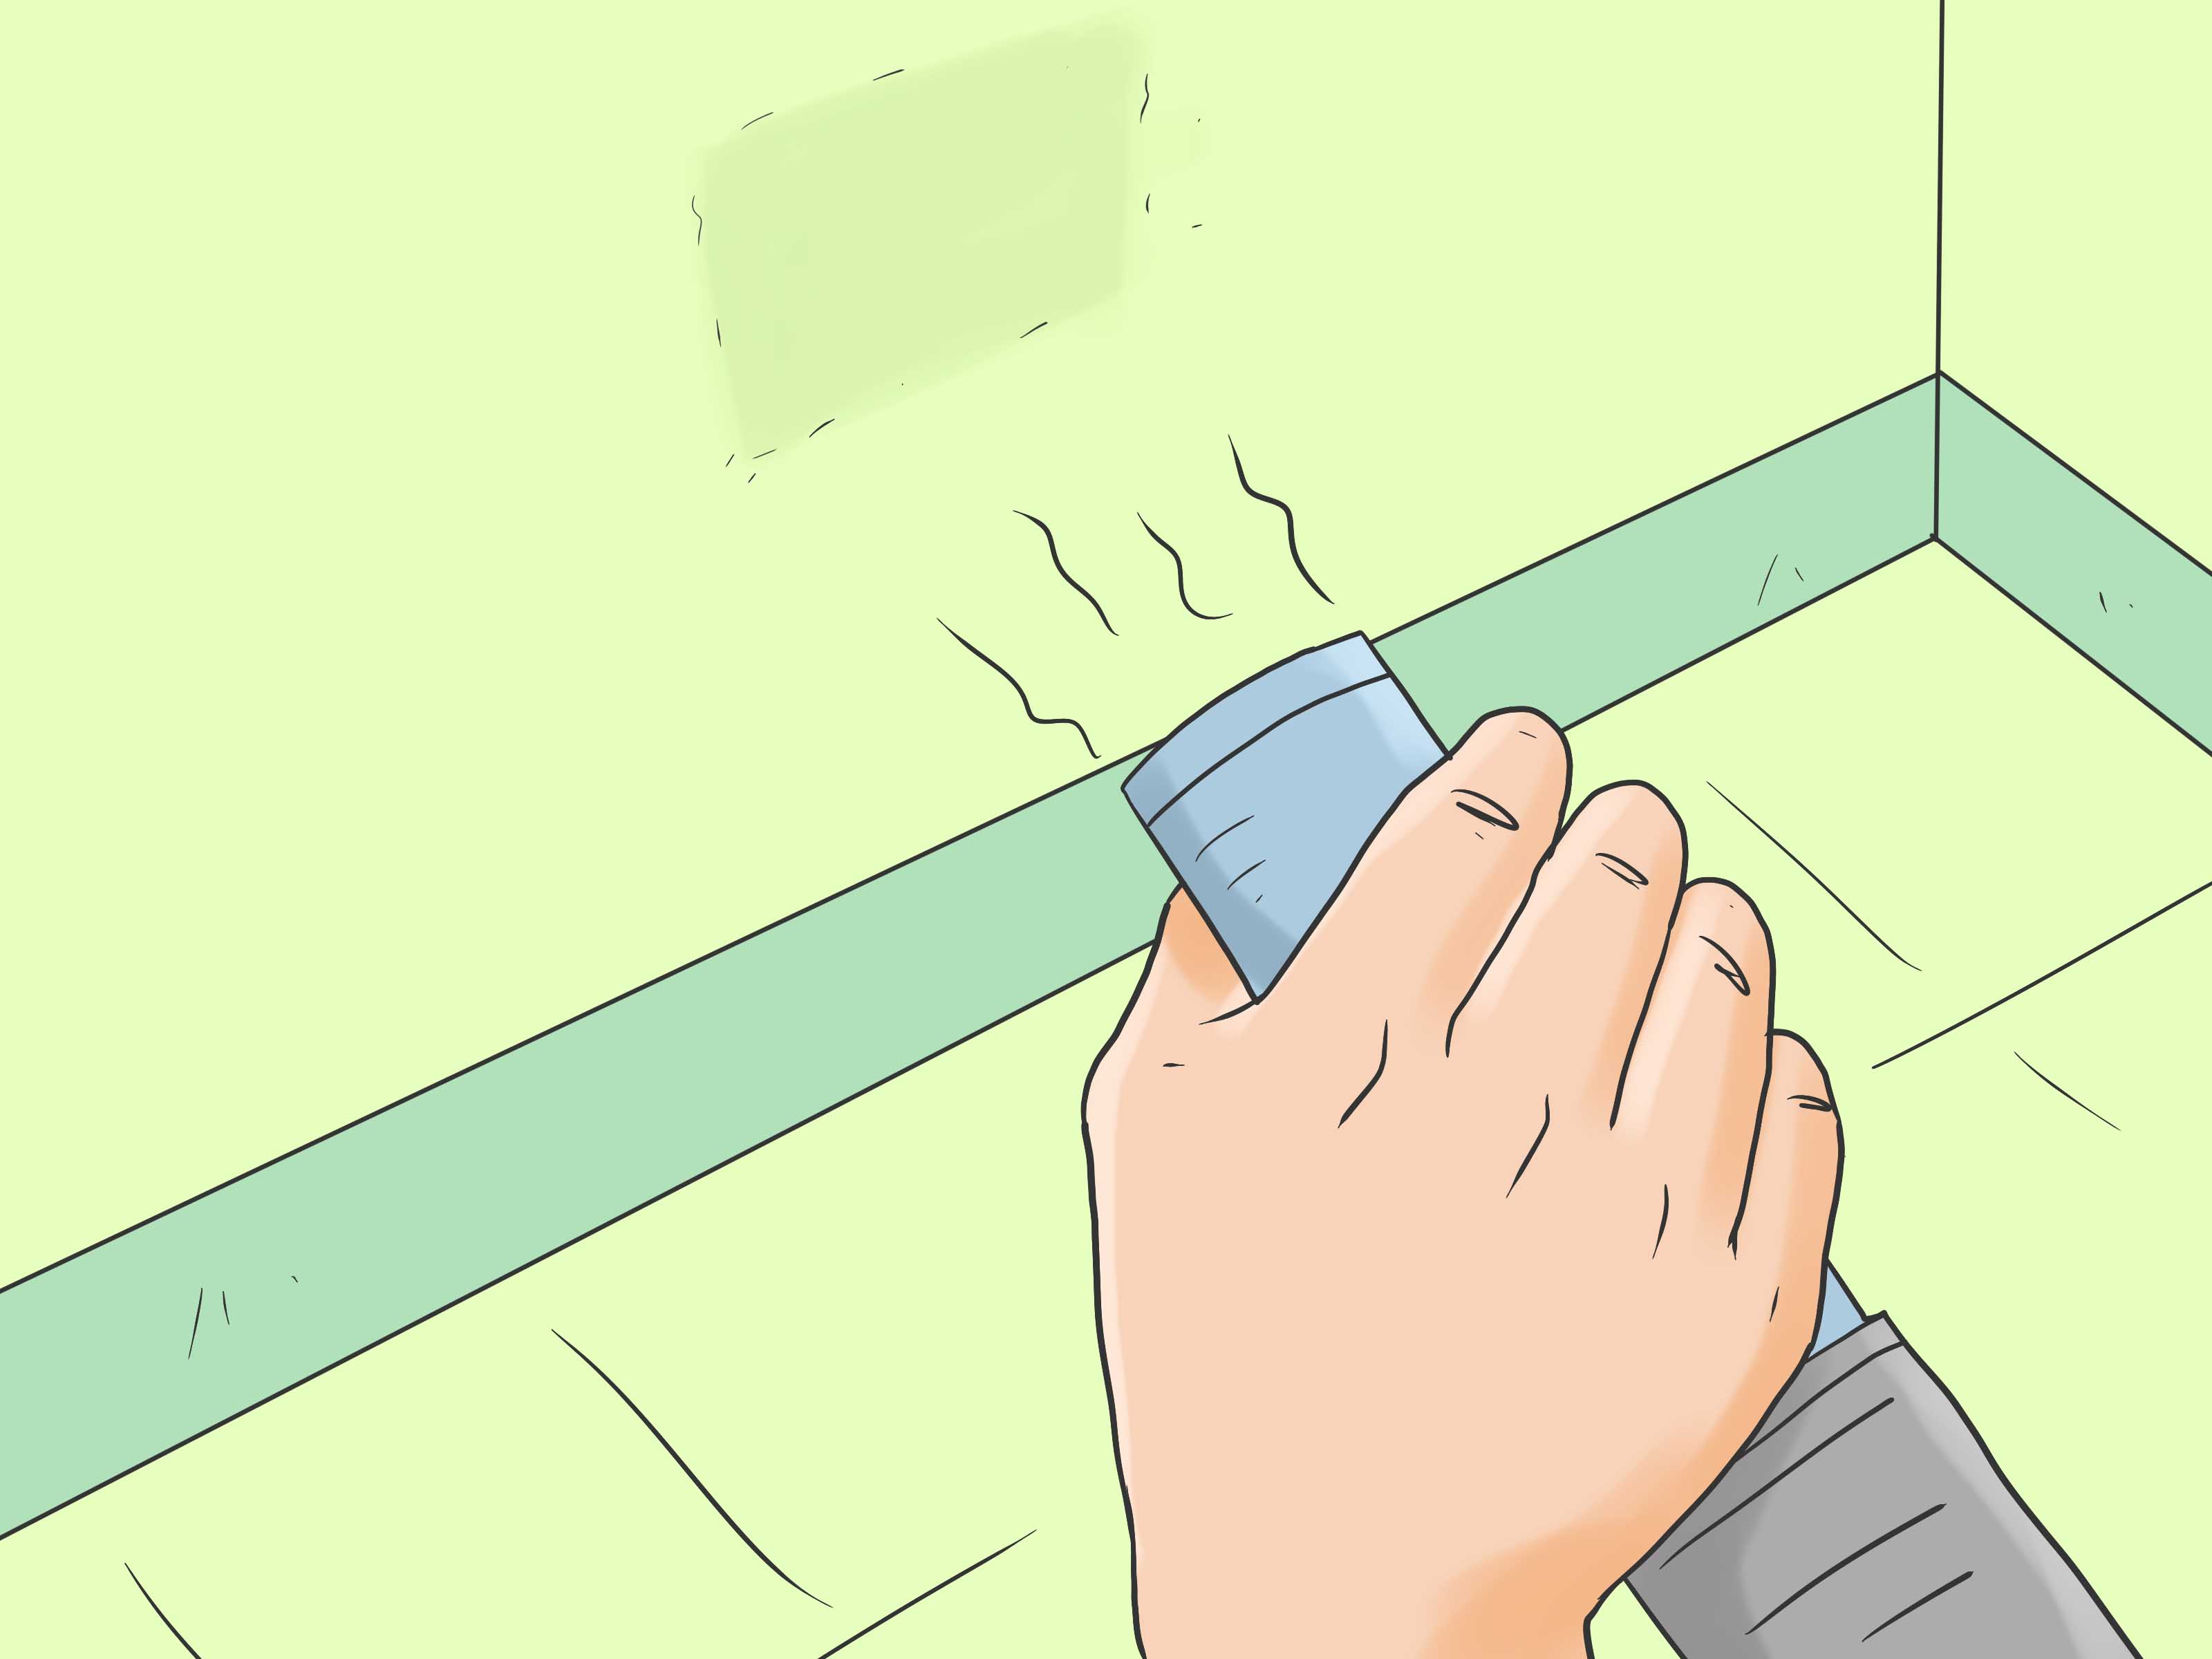 Free 2 Easy Ways To Remove Mold From Drywall Wikihow 3200x2400 For Your Desktop Mobile Tablet Explore 33 Drywalling Over Wallpaper Mud Compound - How To Remove Mold From Bathroom Drywall